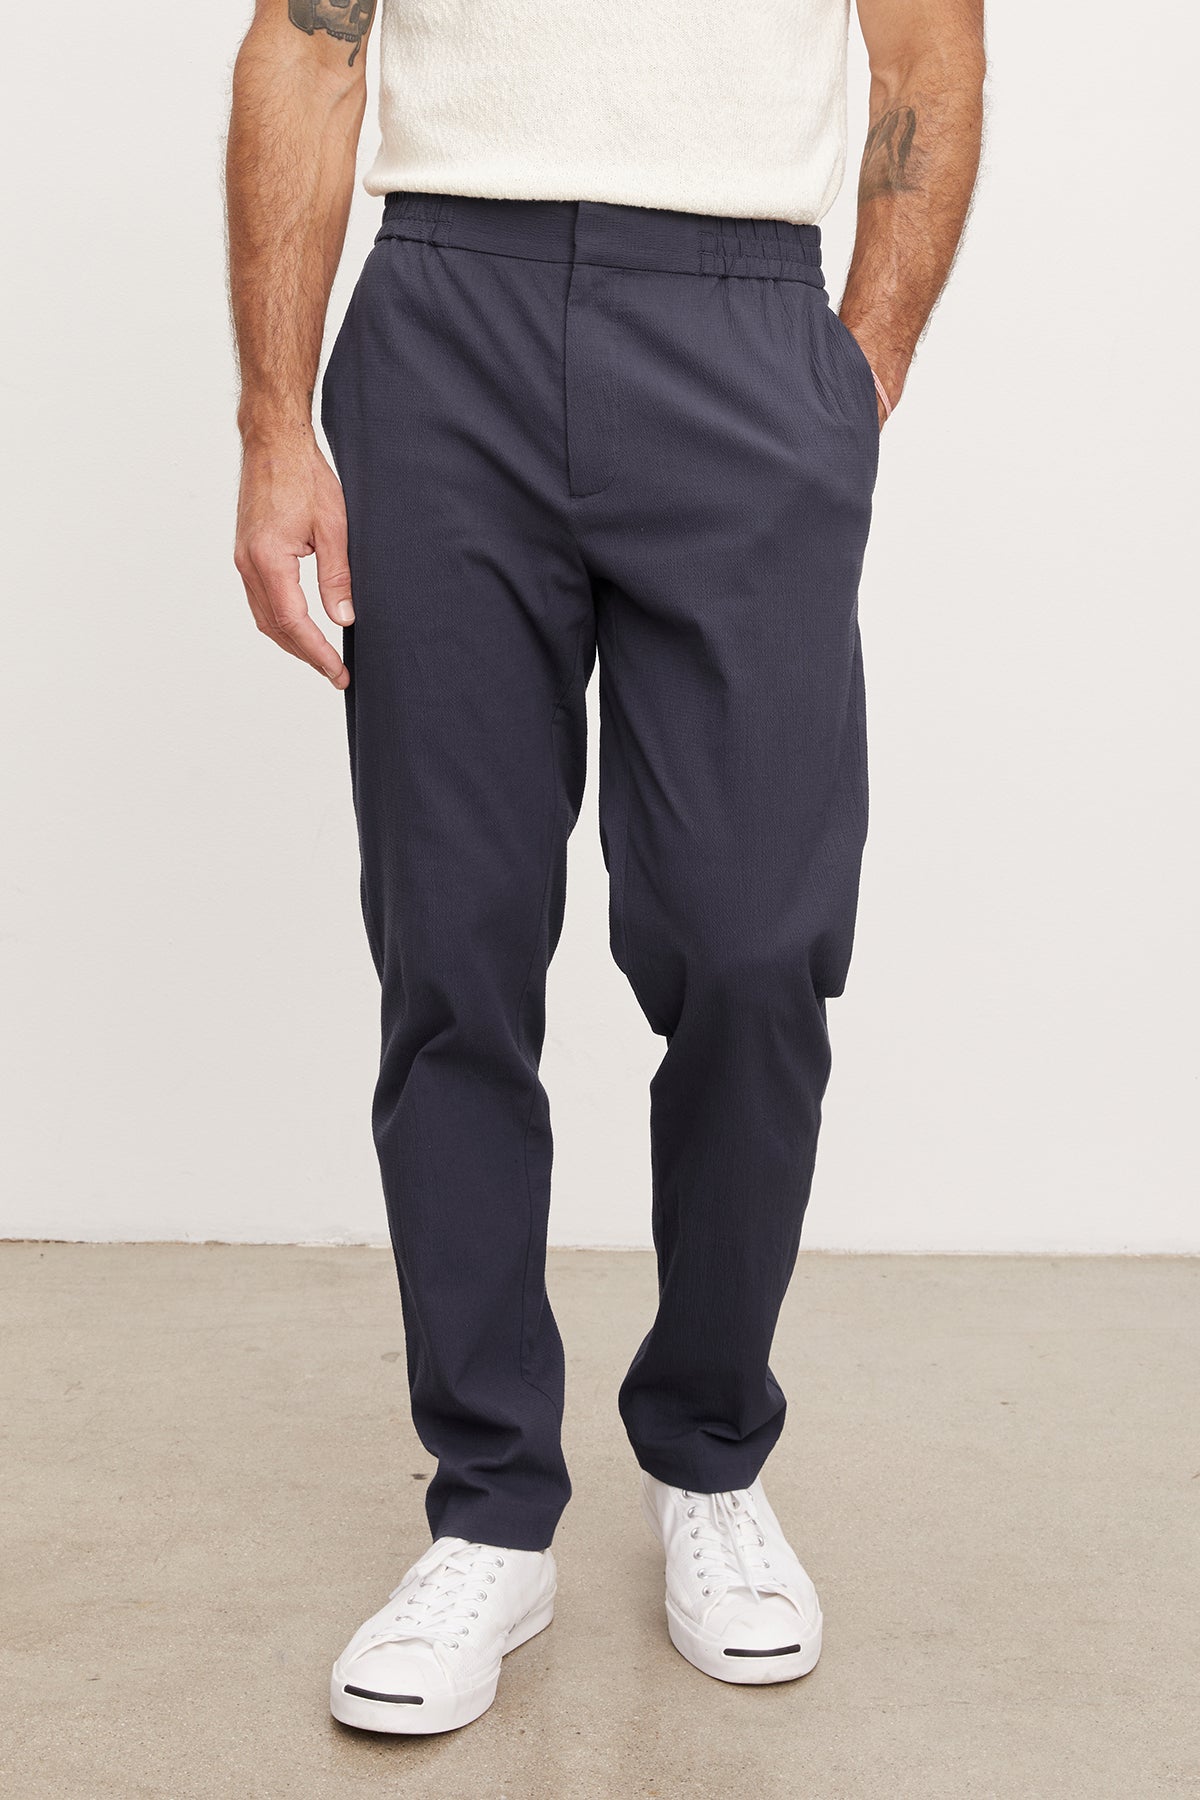   A man wearing navy blue seersucker cotton WILLEM PANTS by Velvet by Graham & Spencer and white sneakers, standing with his hands on his hips. Only the lower half of his body is visible. 